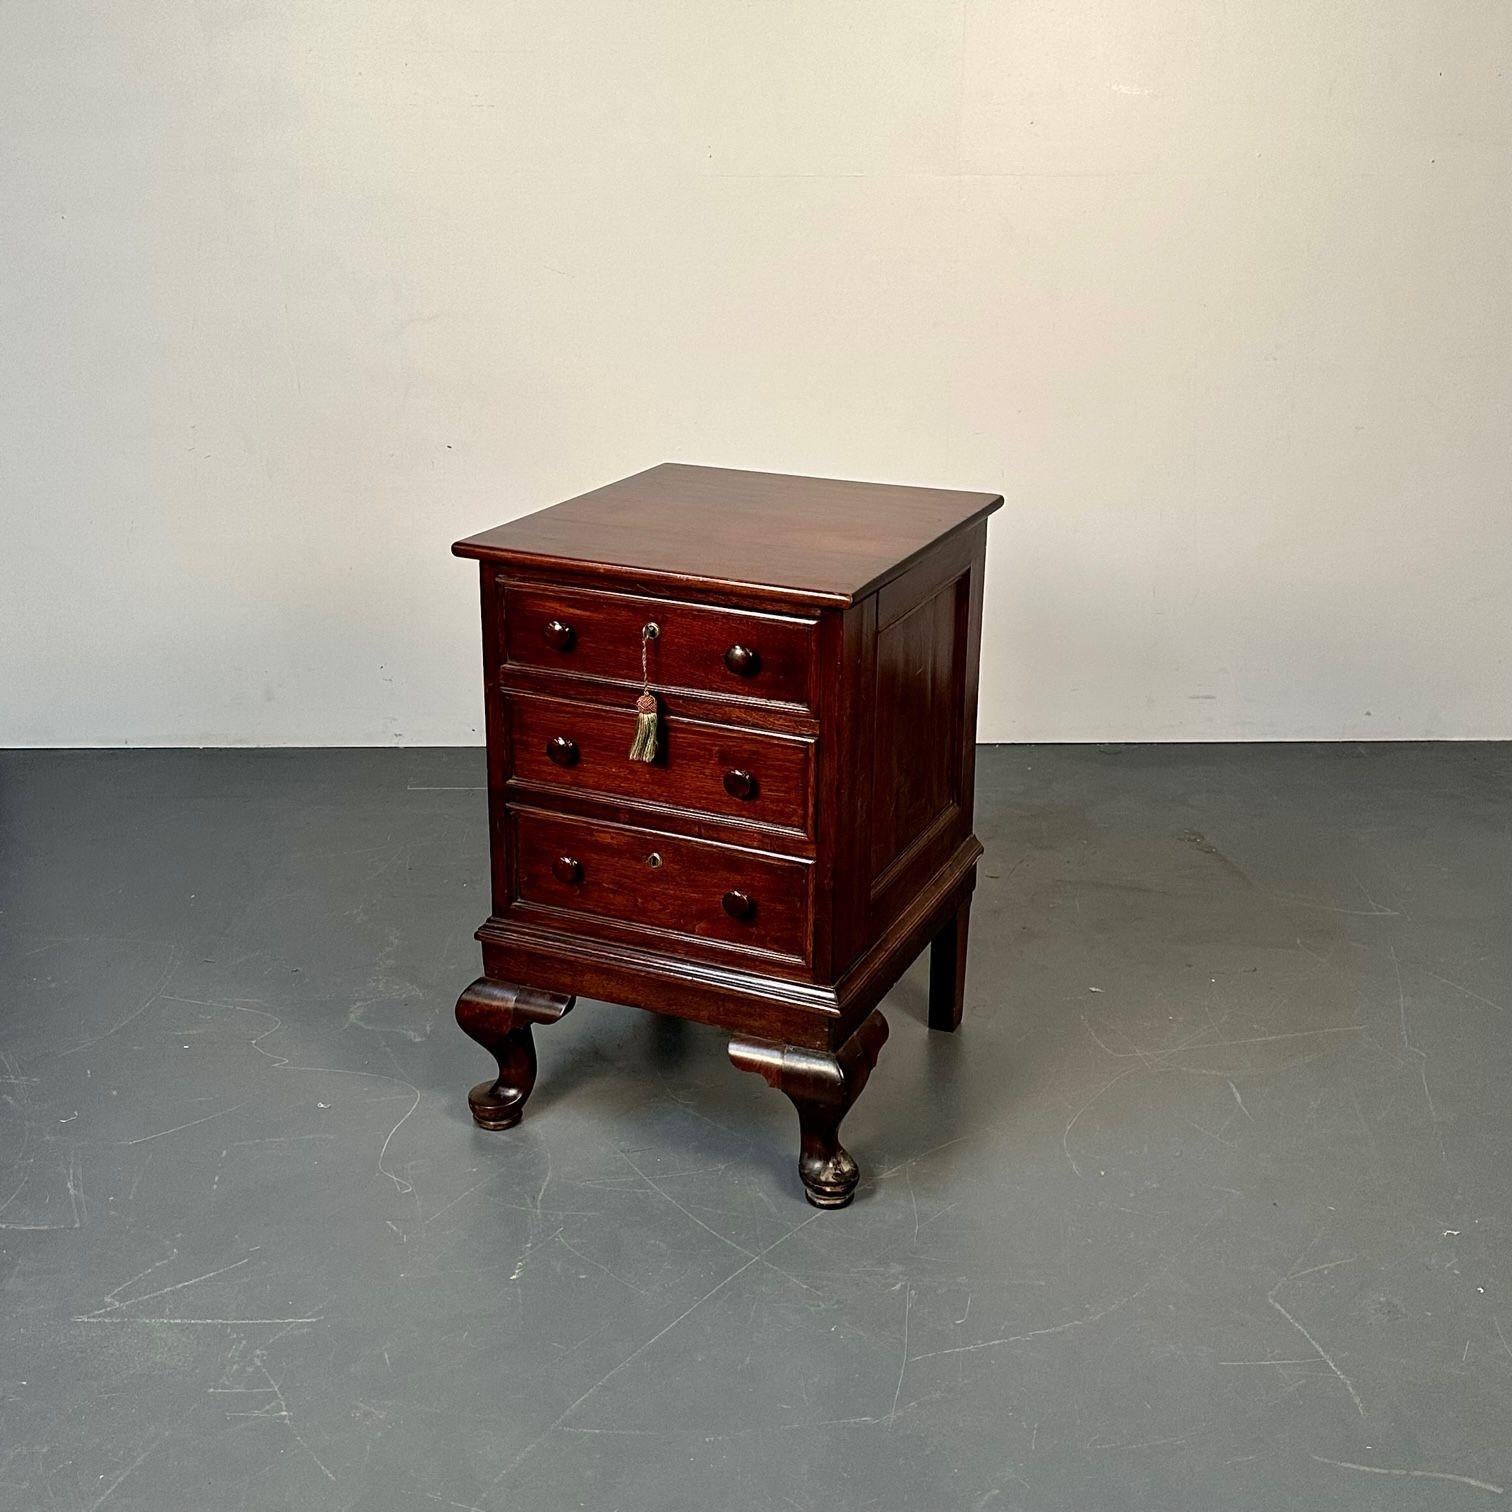 Single Polished Mahogany Georgian Queen Anne leg chest / nightstand, English
A lovely finely polished chest or bedside stand. Late 18th or early 19th century. 
Mahogany
England, 19th century.
 
IZAX.